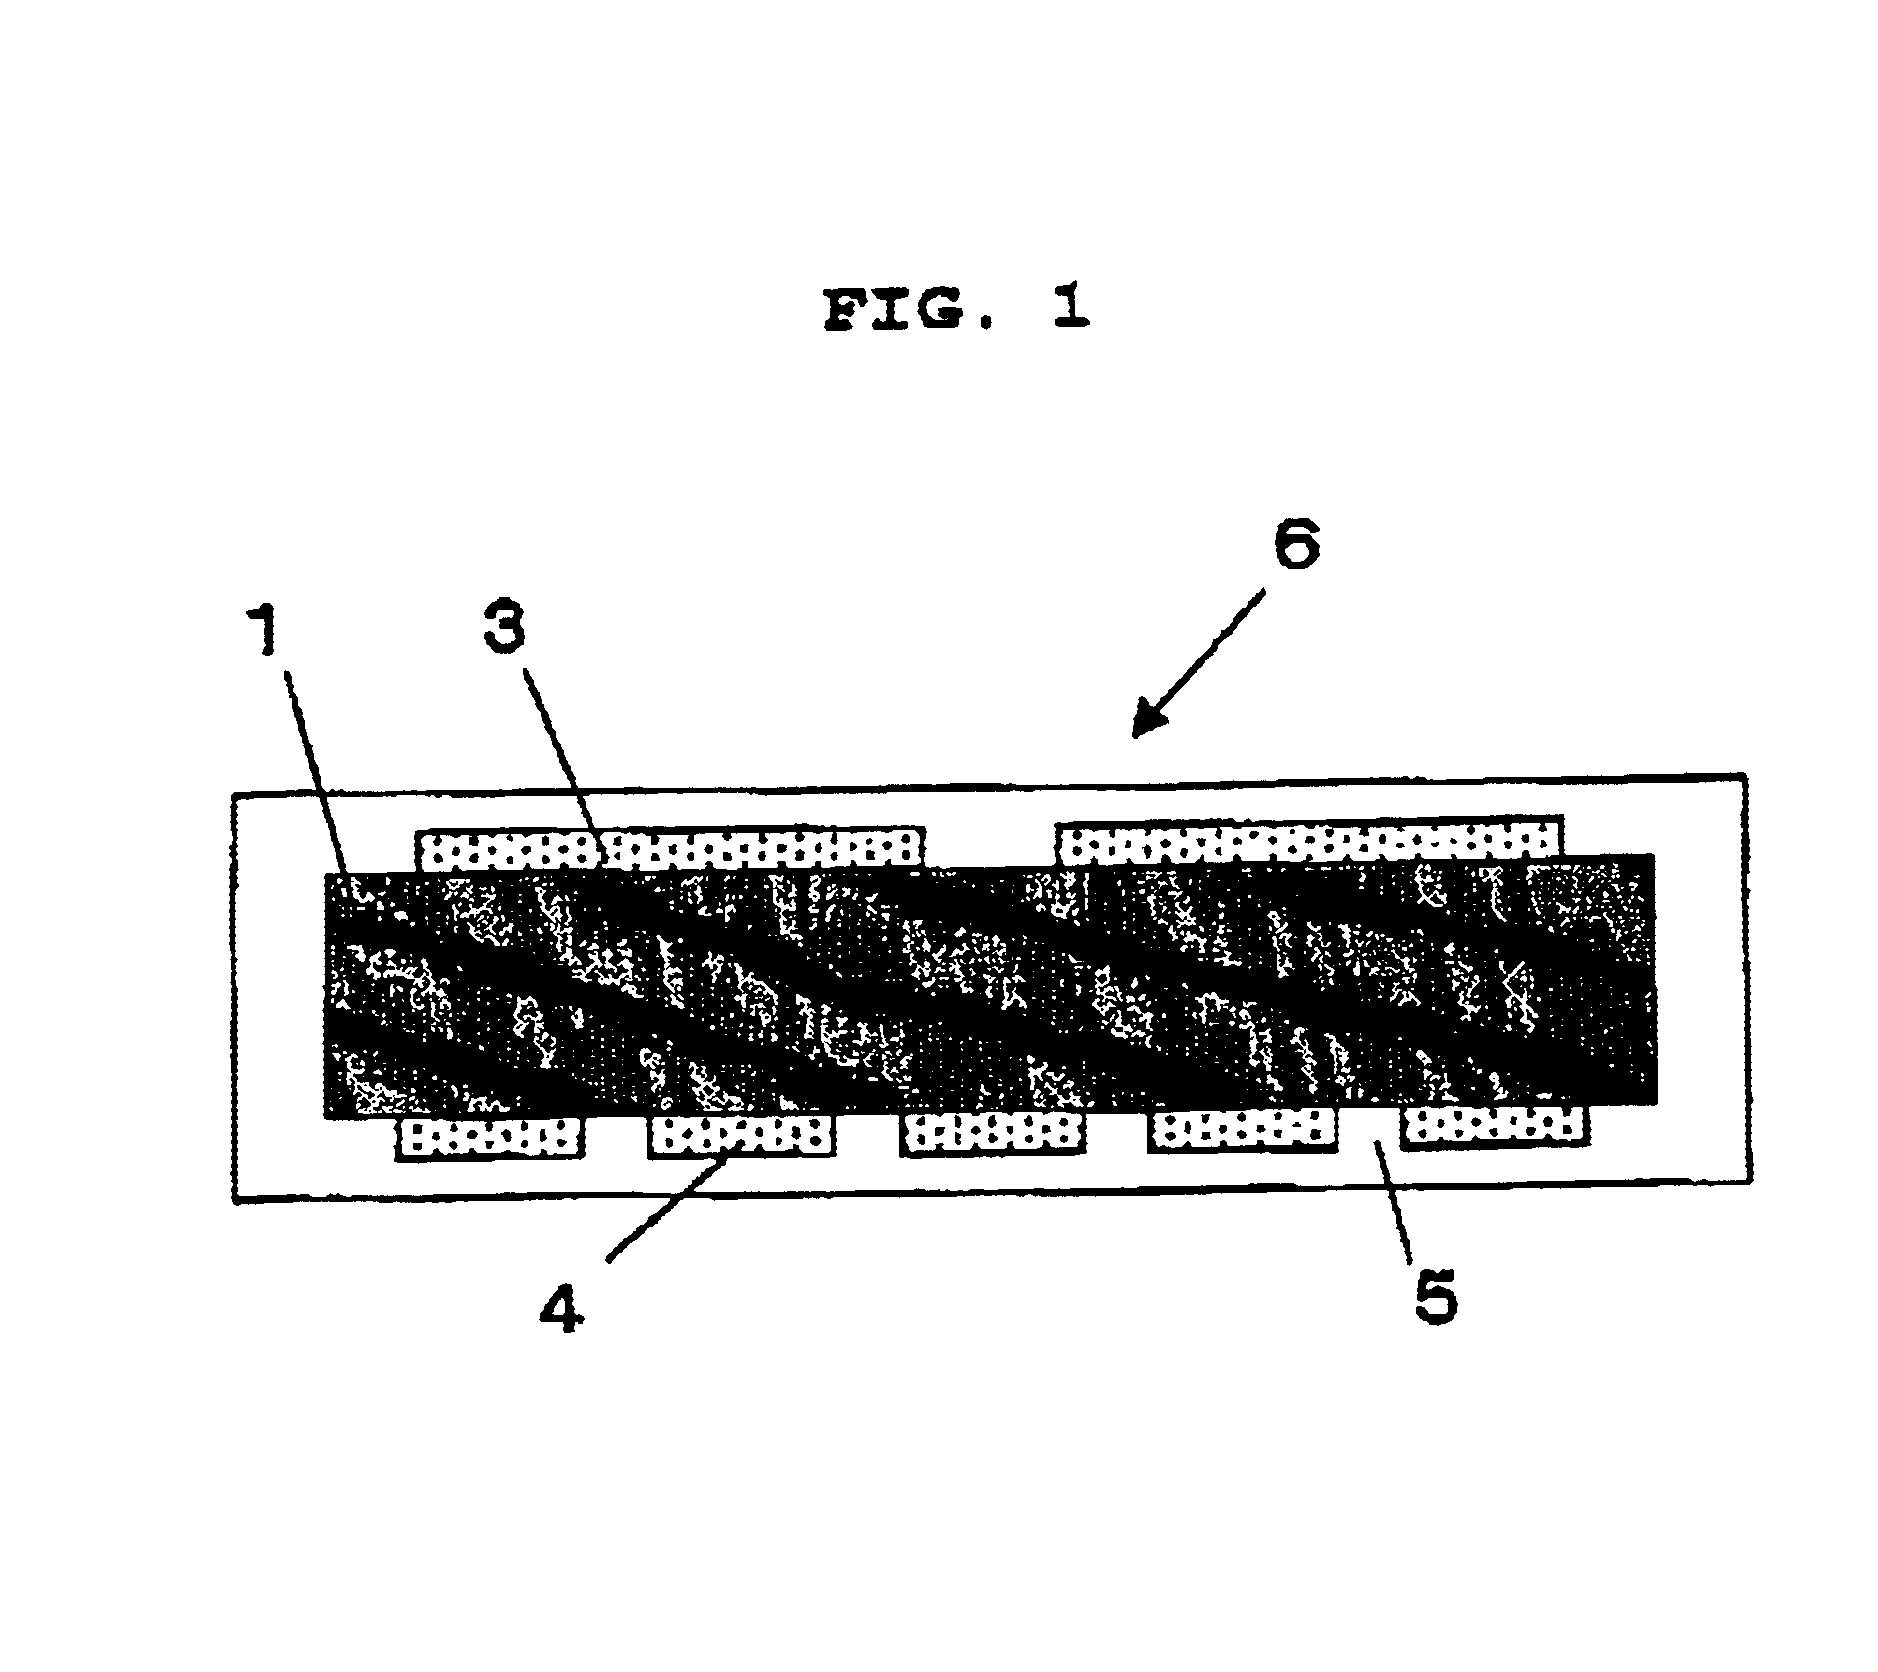 Heating apparatus which has electrostatic adsorption function, and method for producing it